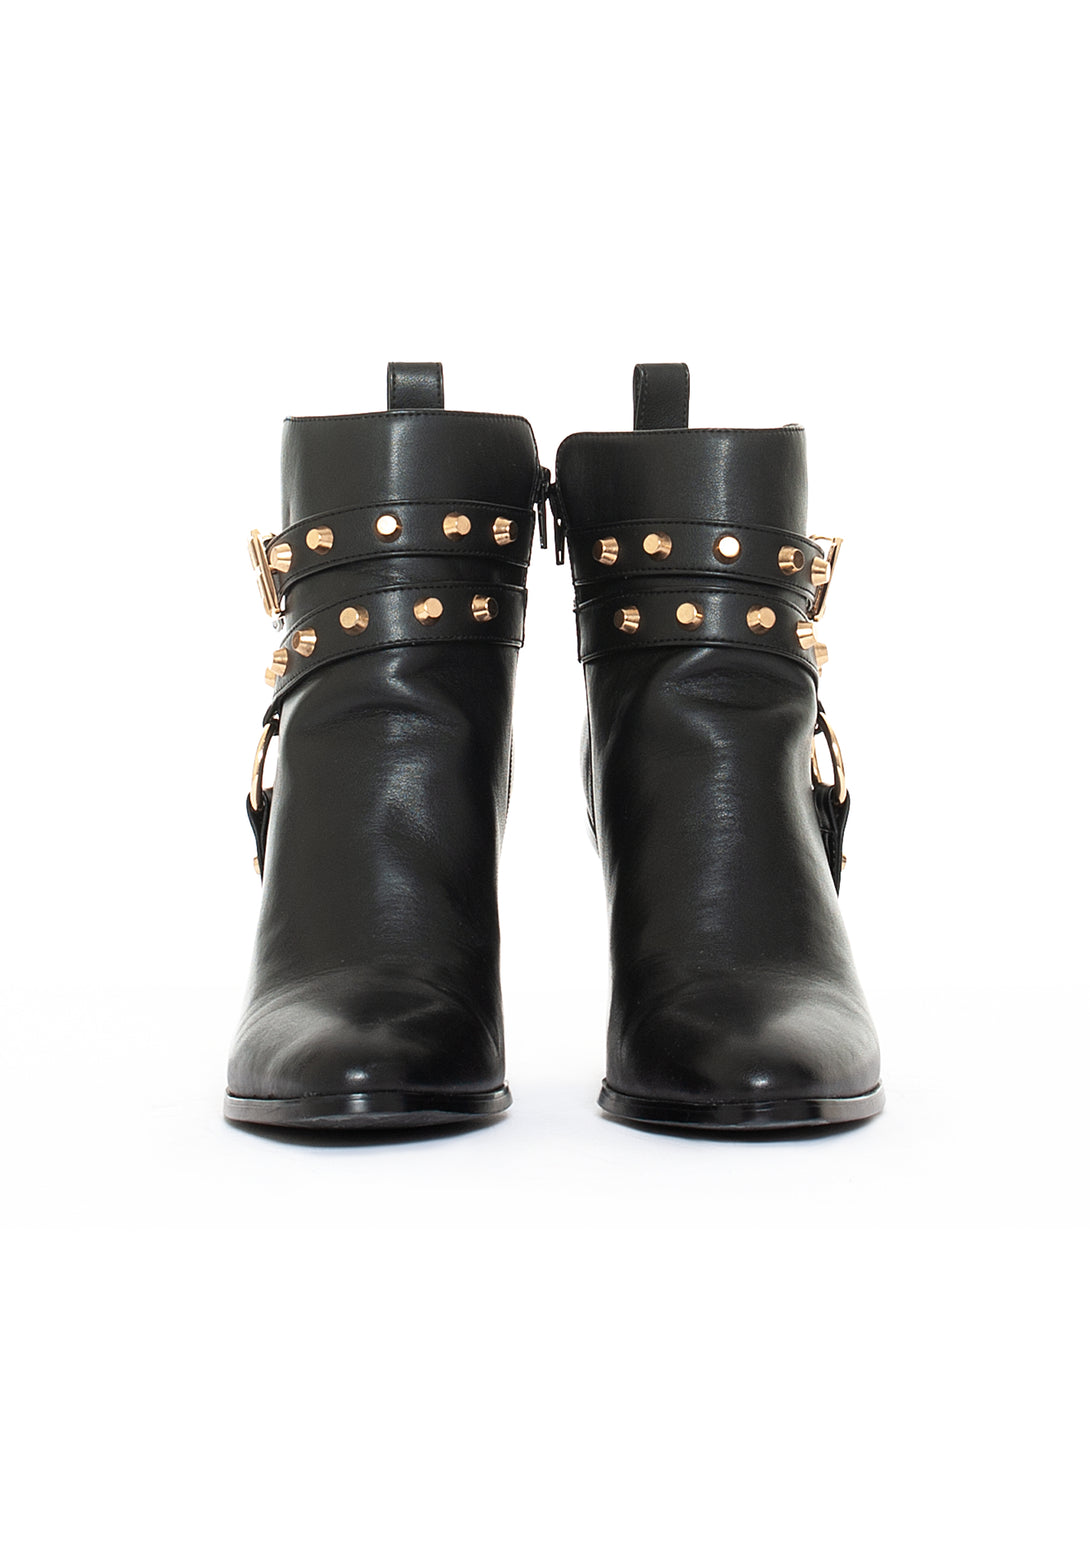 Ankle boots made in leather with metallic studs